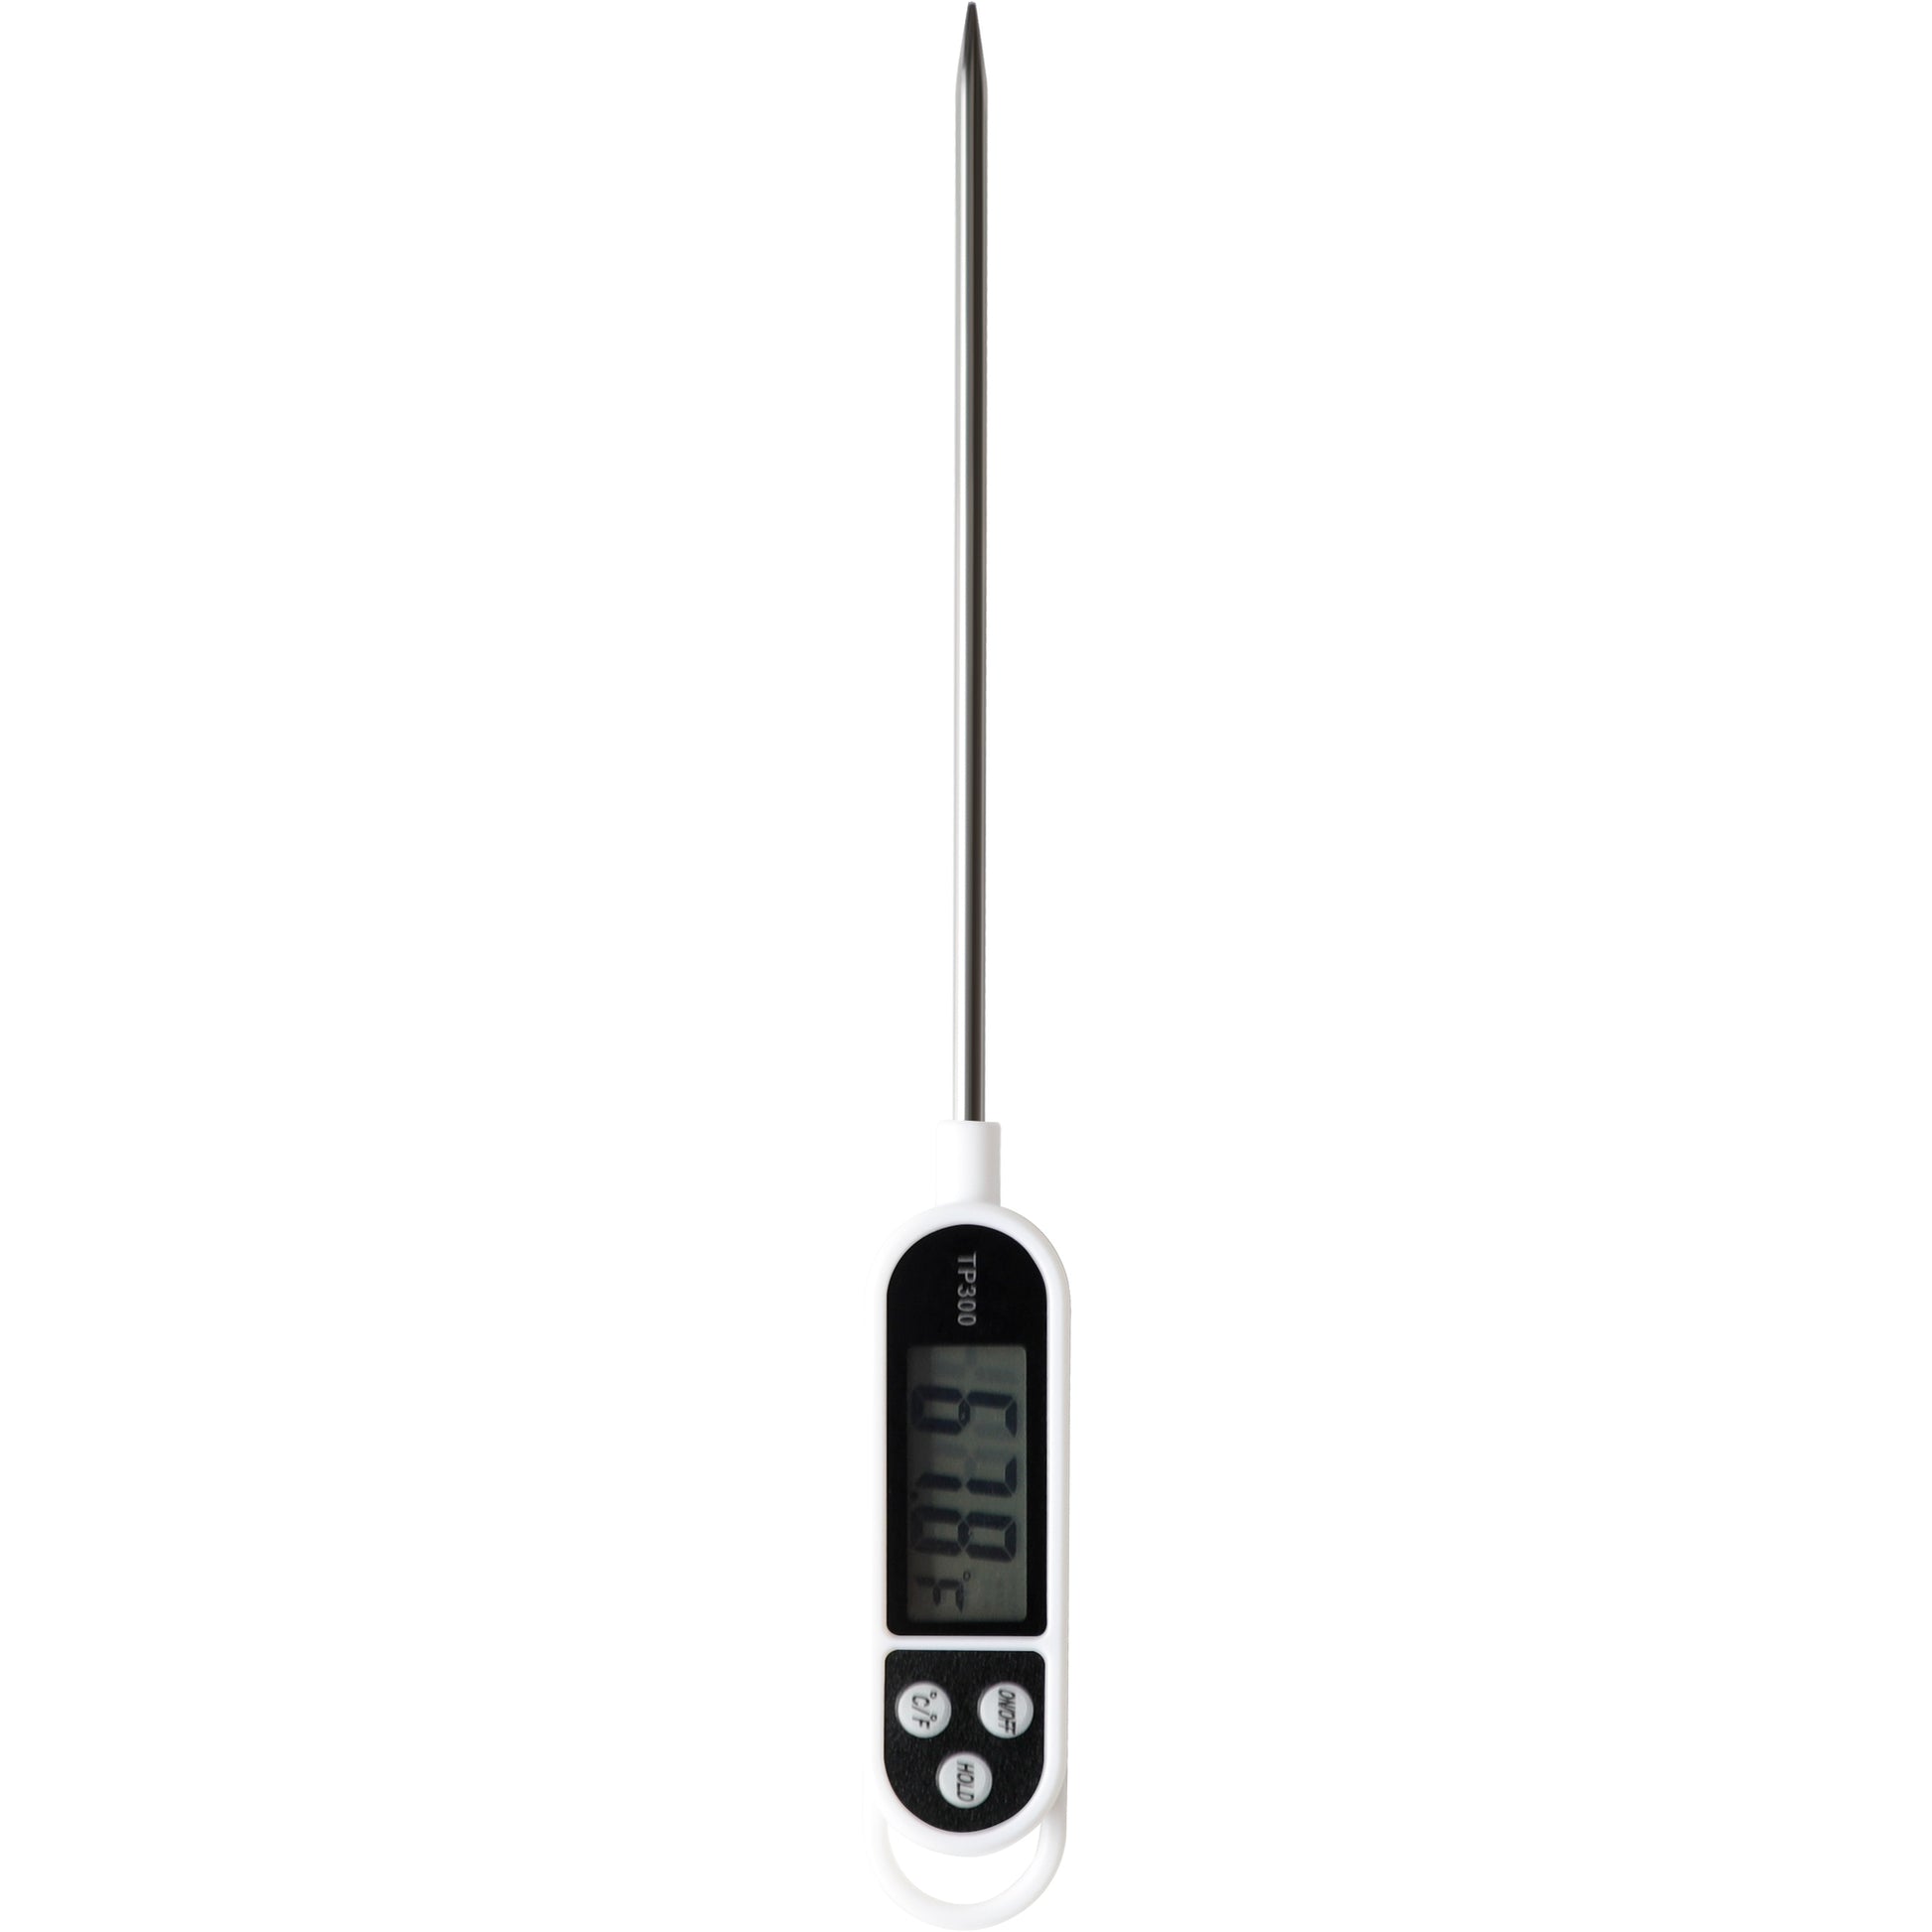 North Point® Digital thermometer isolated on white background.